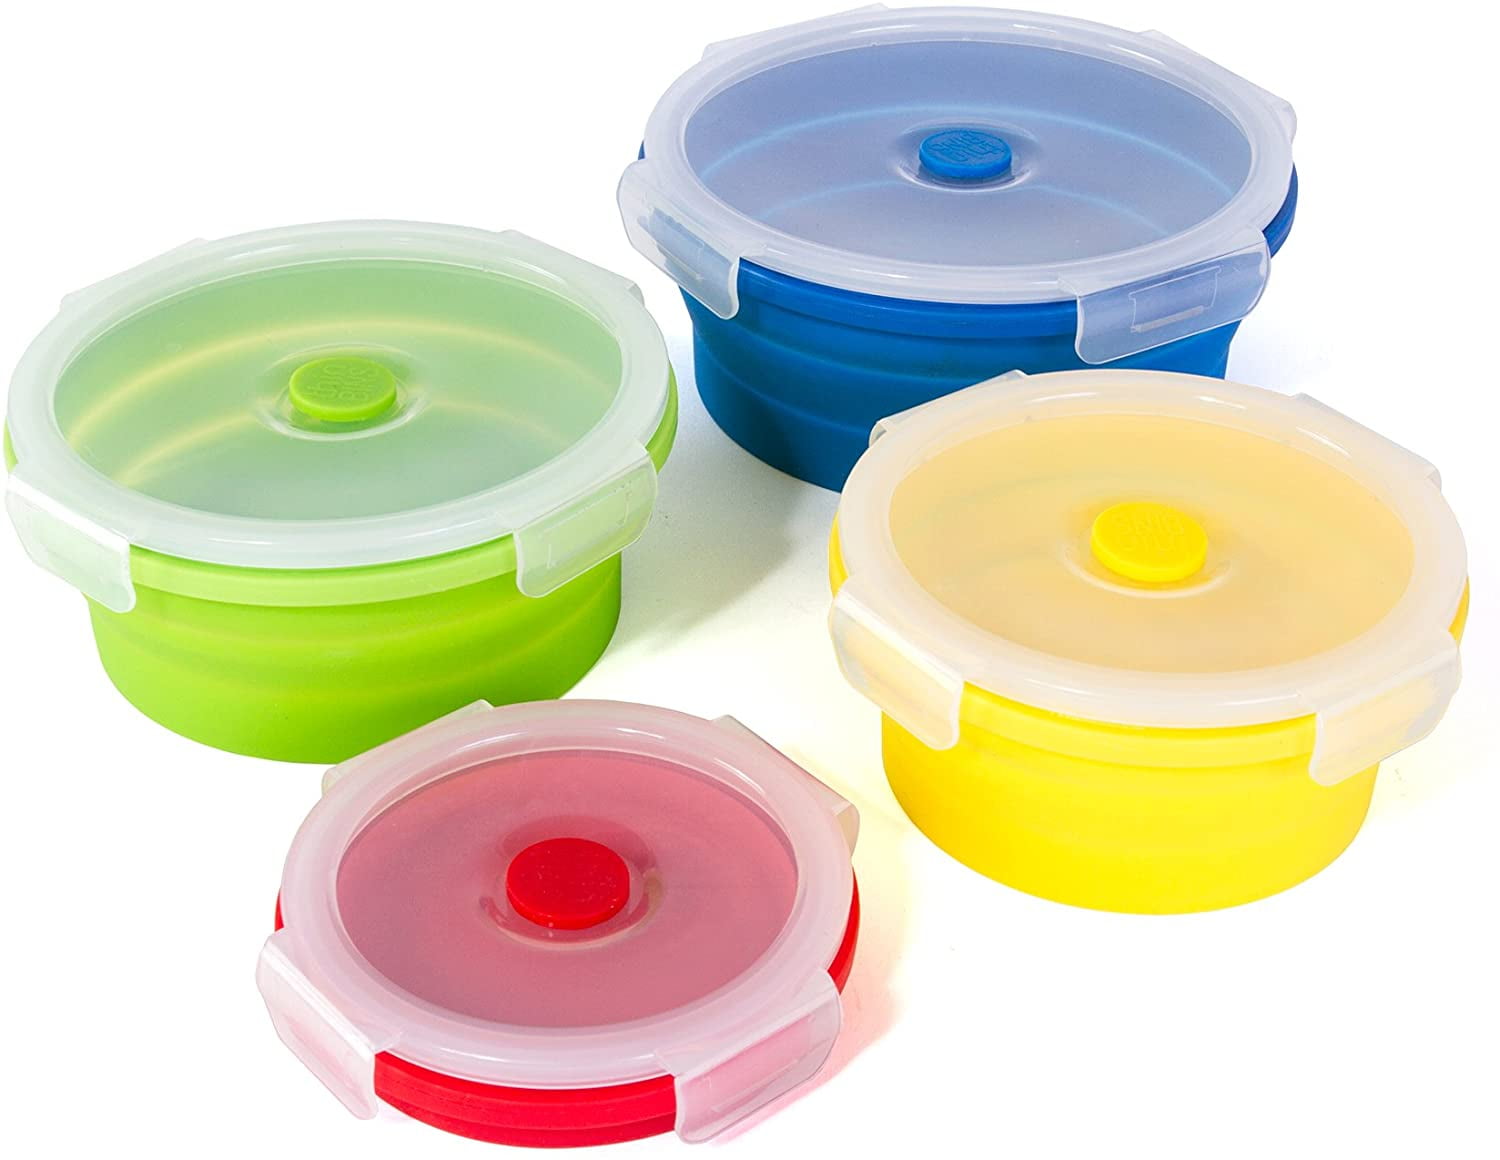 SiliStorage [Bonus Tumbler] Set of Three Rectangular Collapsible Food  Storage Containers with Airtight Flexible Lids - BPA Free, Compact, Oven